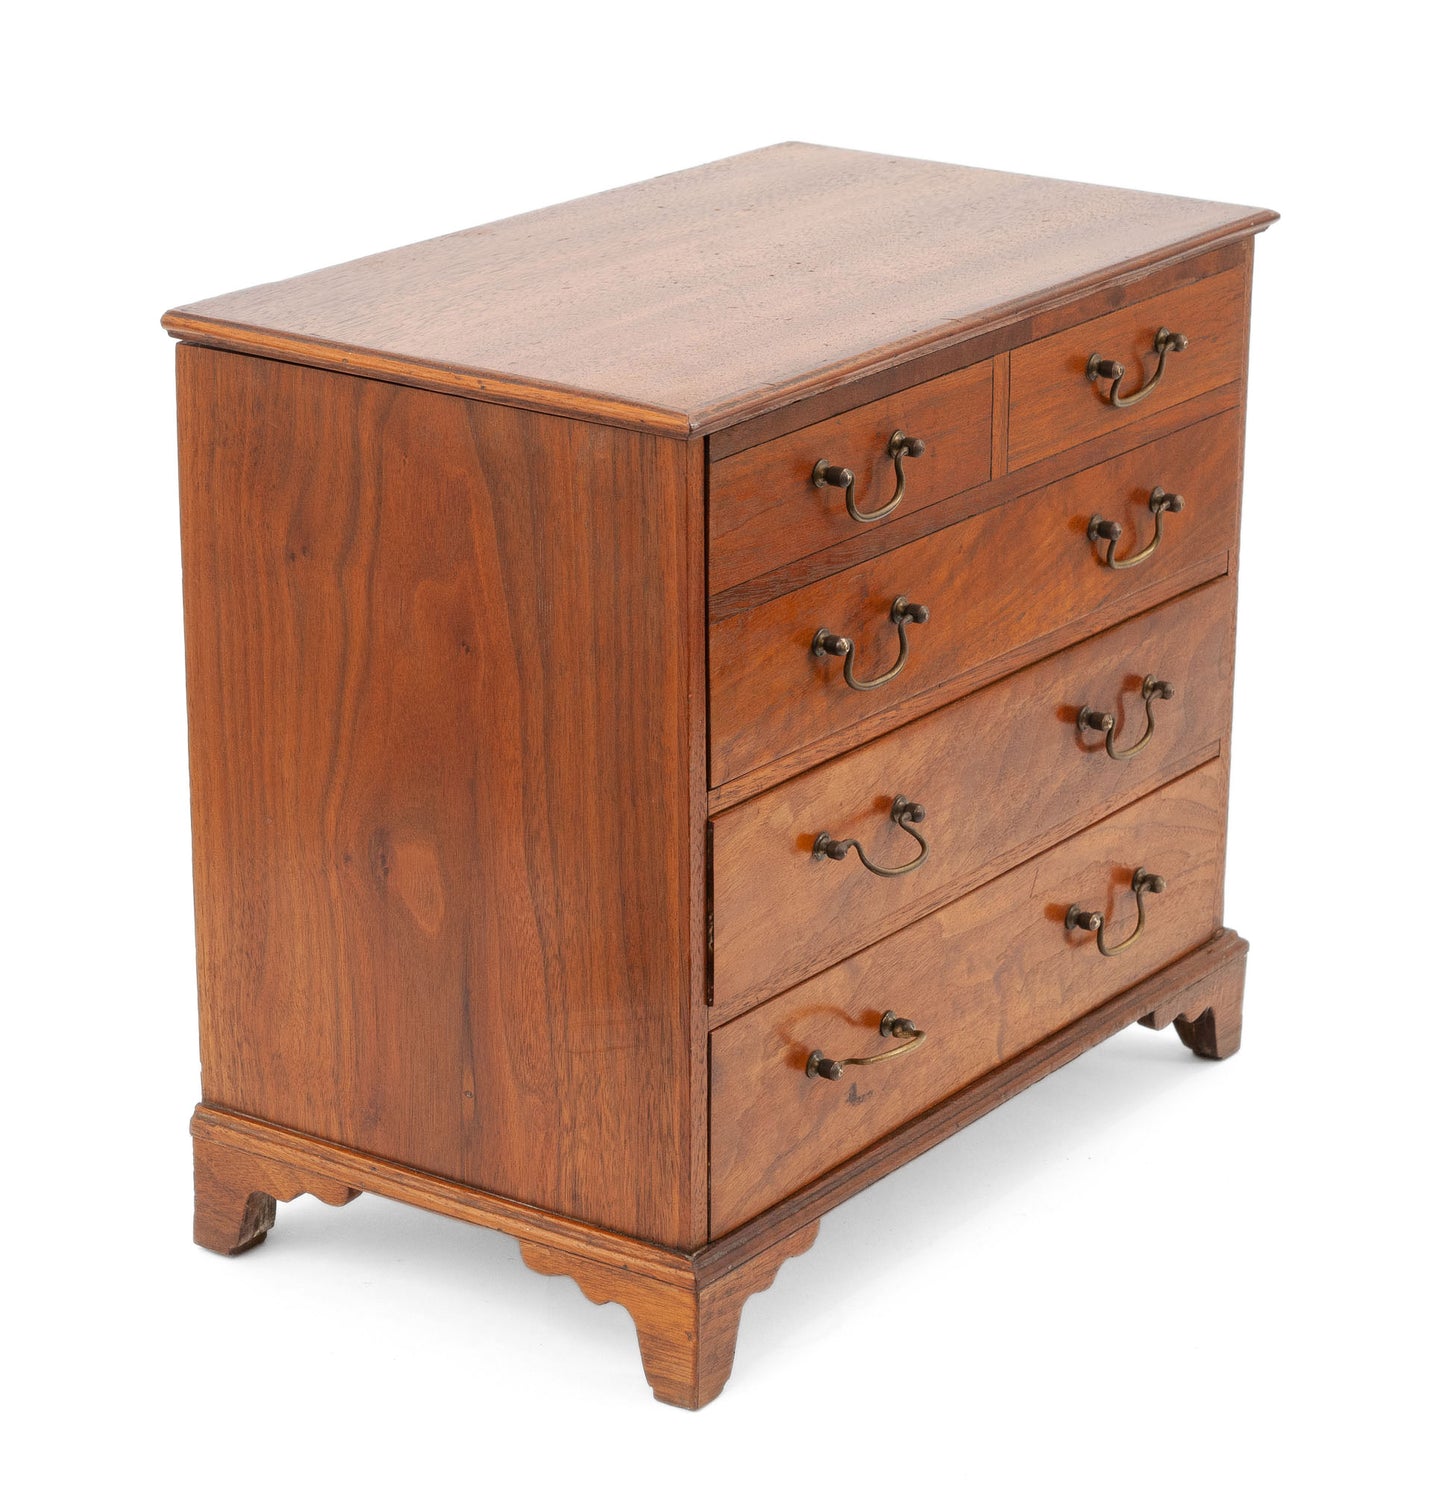 Antique Victorian/Edwardian Mahogany Wood Chest of Drawers Sewing/Jewellery Box (Code 1510)